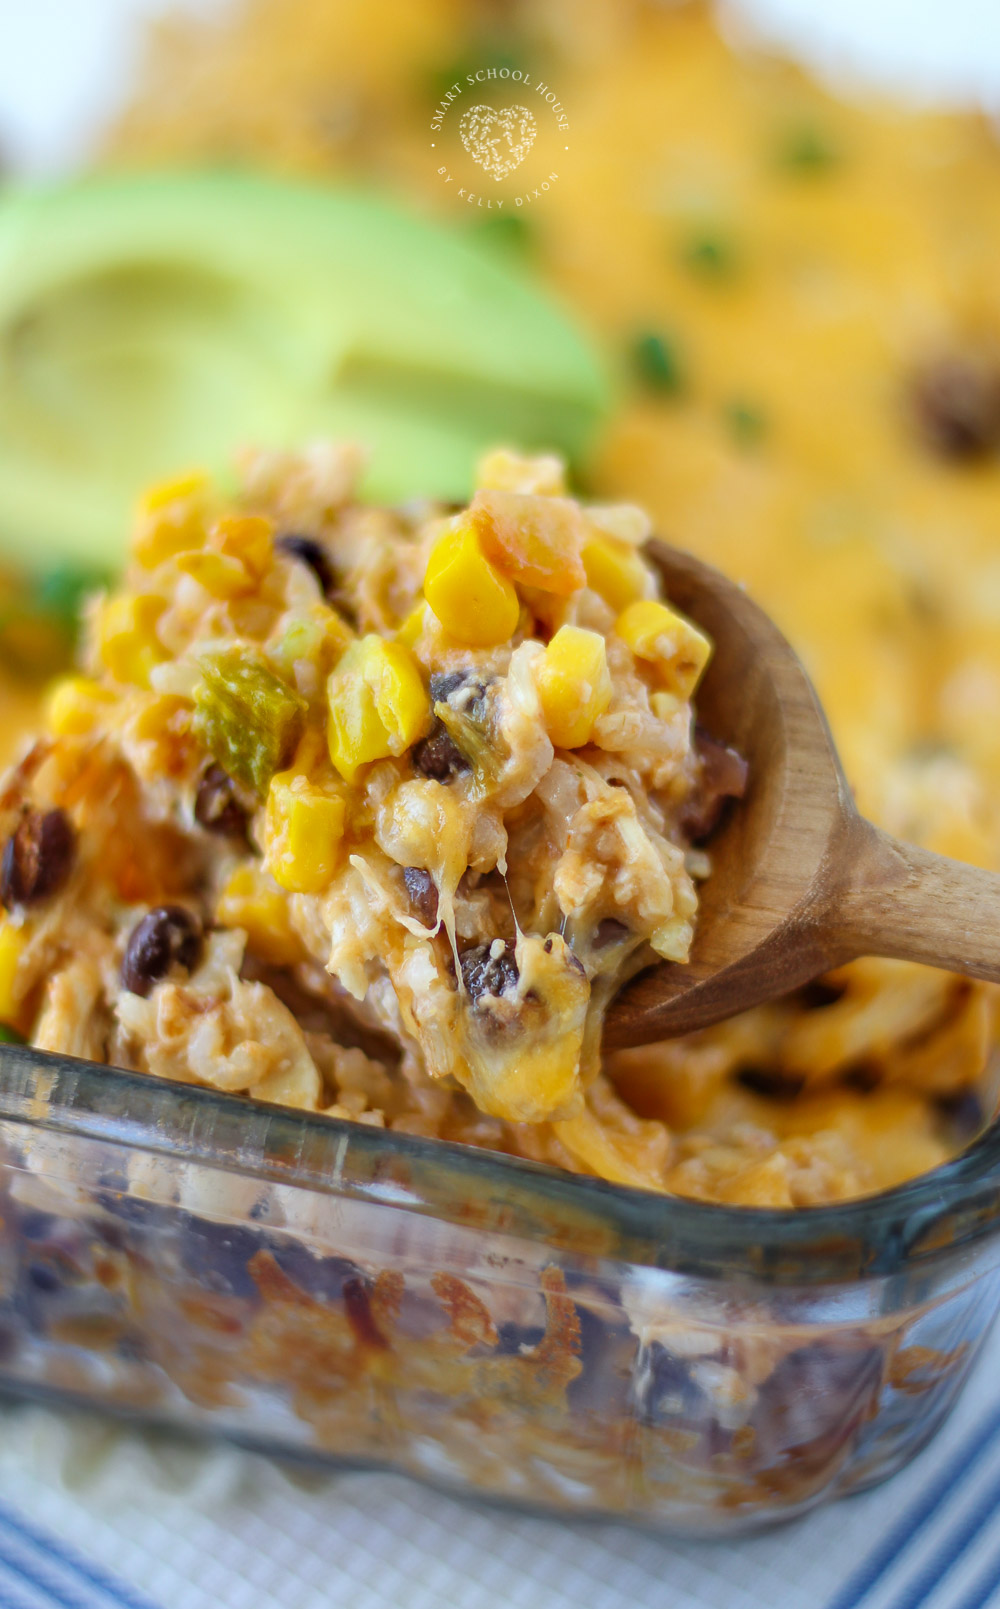 This Mexican Chicken and Rice Casserole is an easy and delicious meal! This dinner recipe is made in one baking dish and is done just in 30 minutes making clean up a breeze. Perfect for busy week nights! Our family LOVES Mexican food and that’s why this dinner is one of our favorites. 